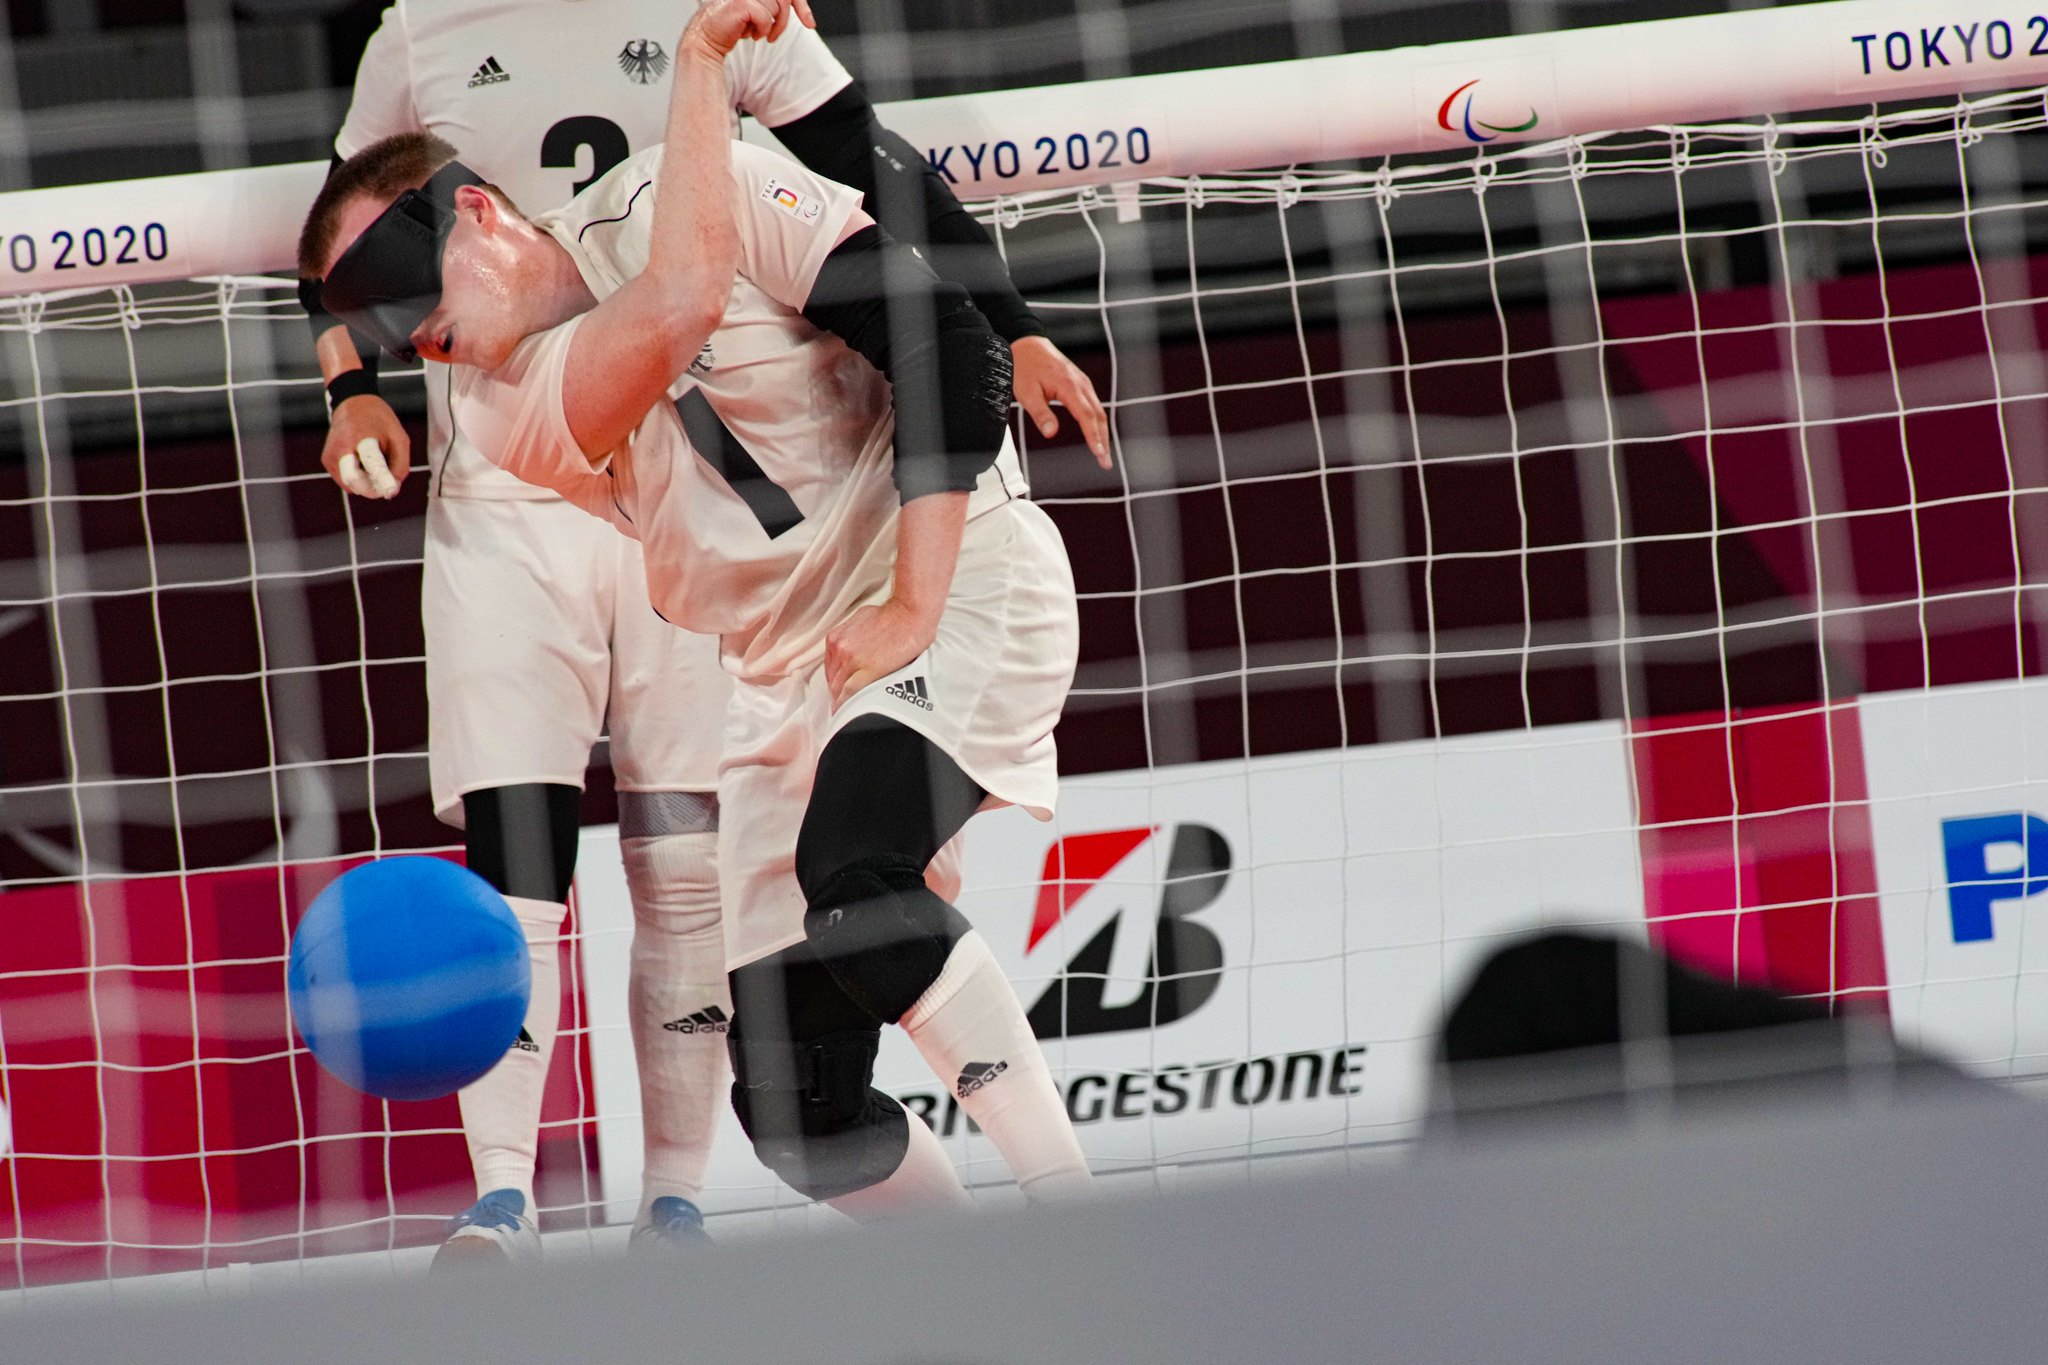 soaked in sweat, Michael Dennis of Germany flings the goalball across the court